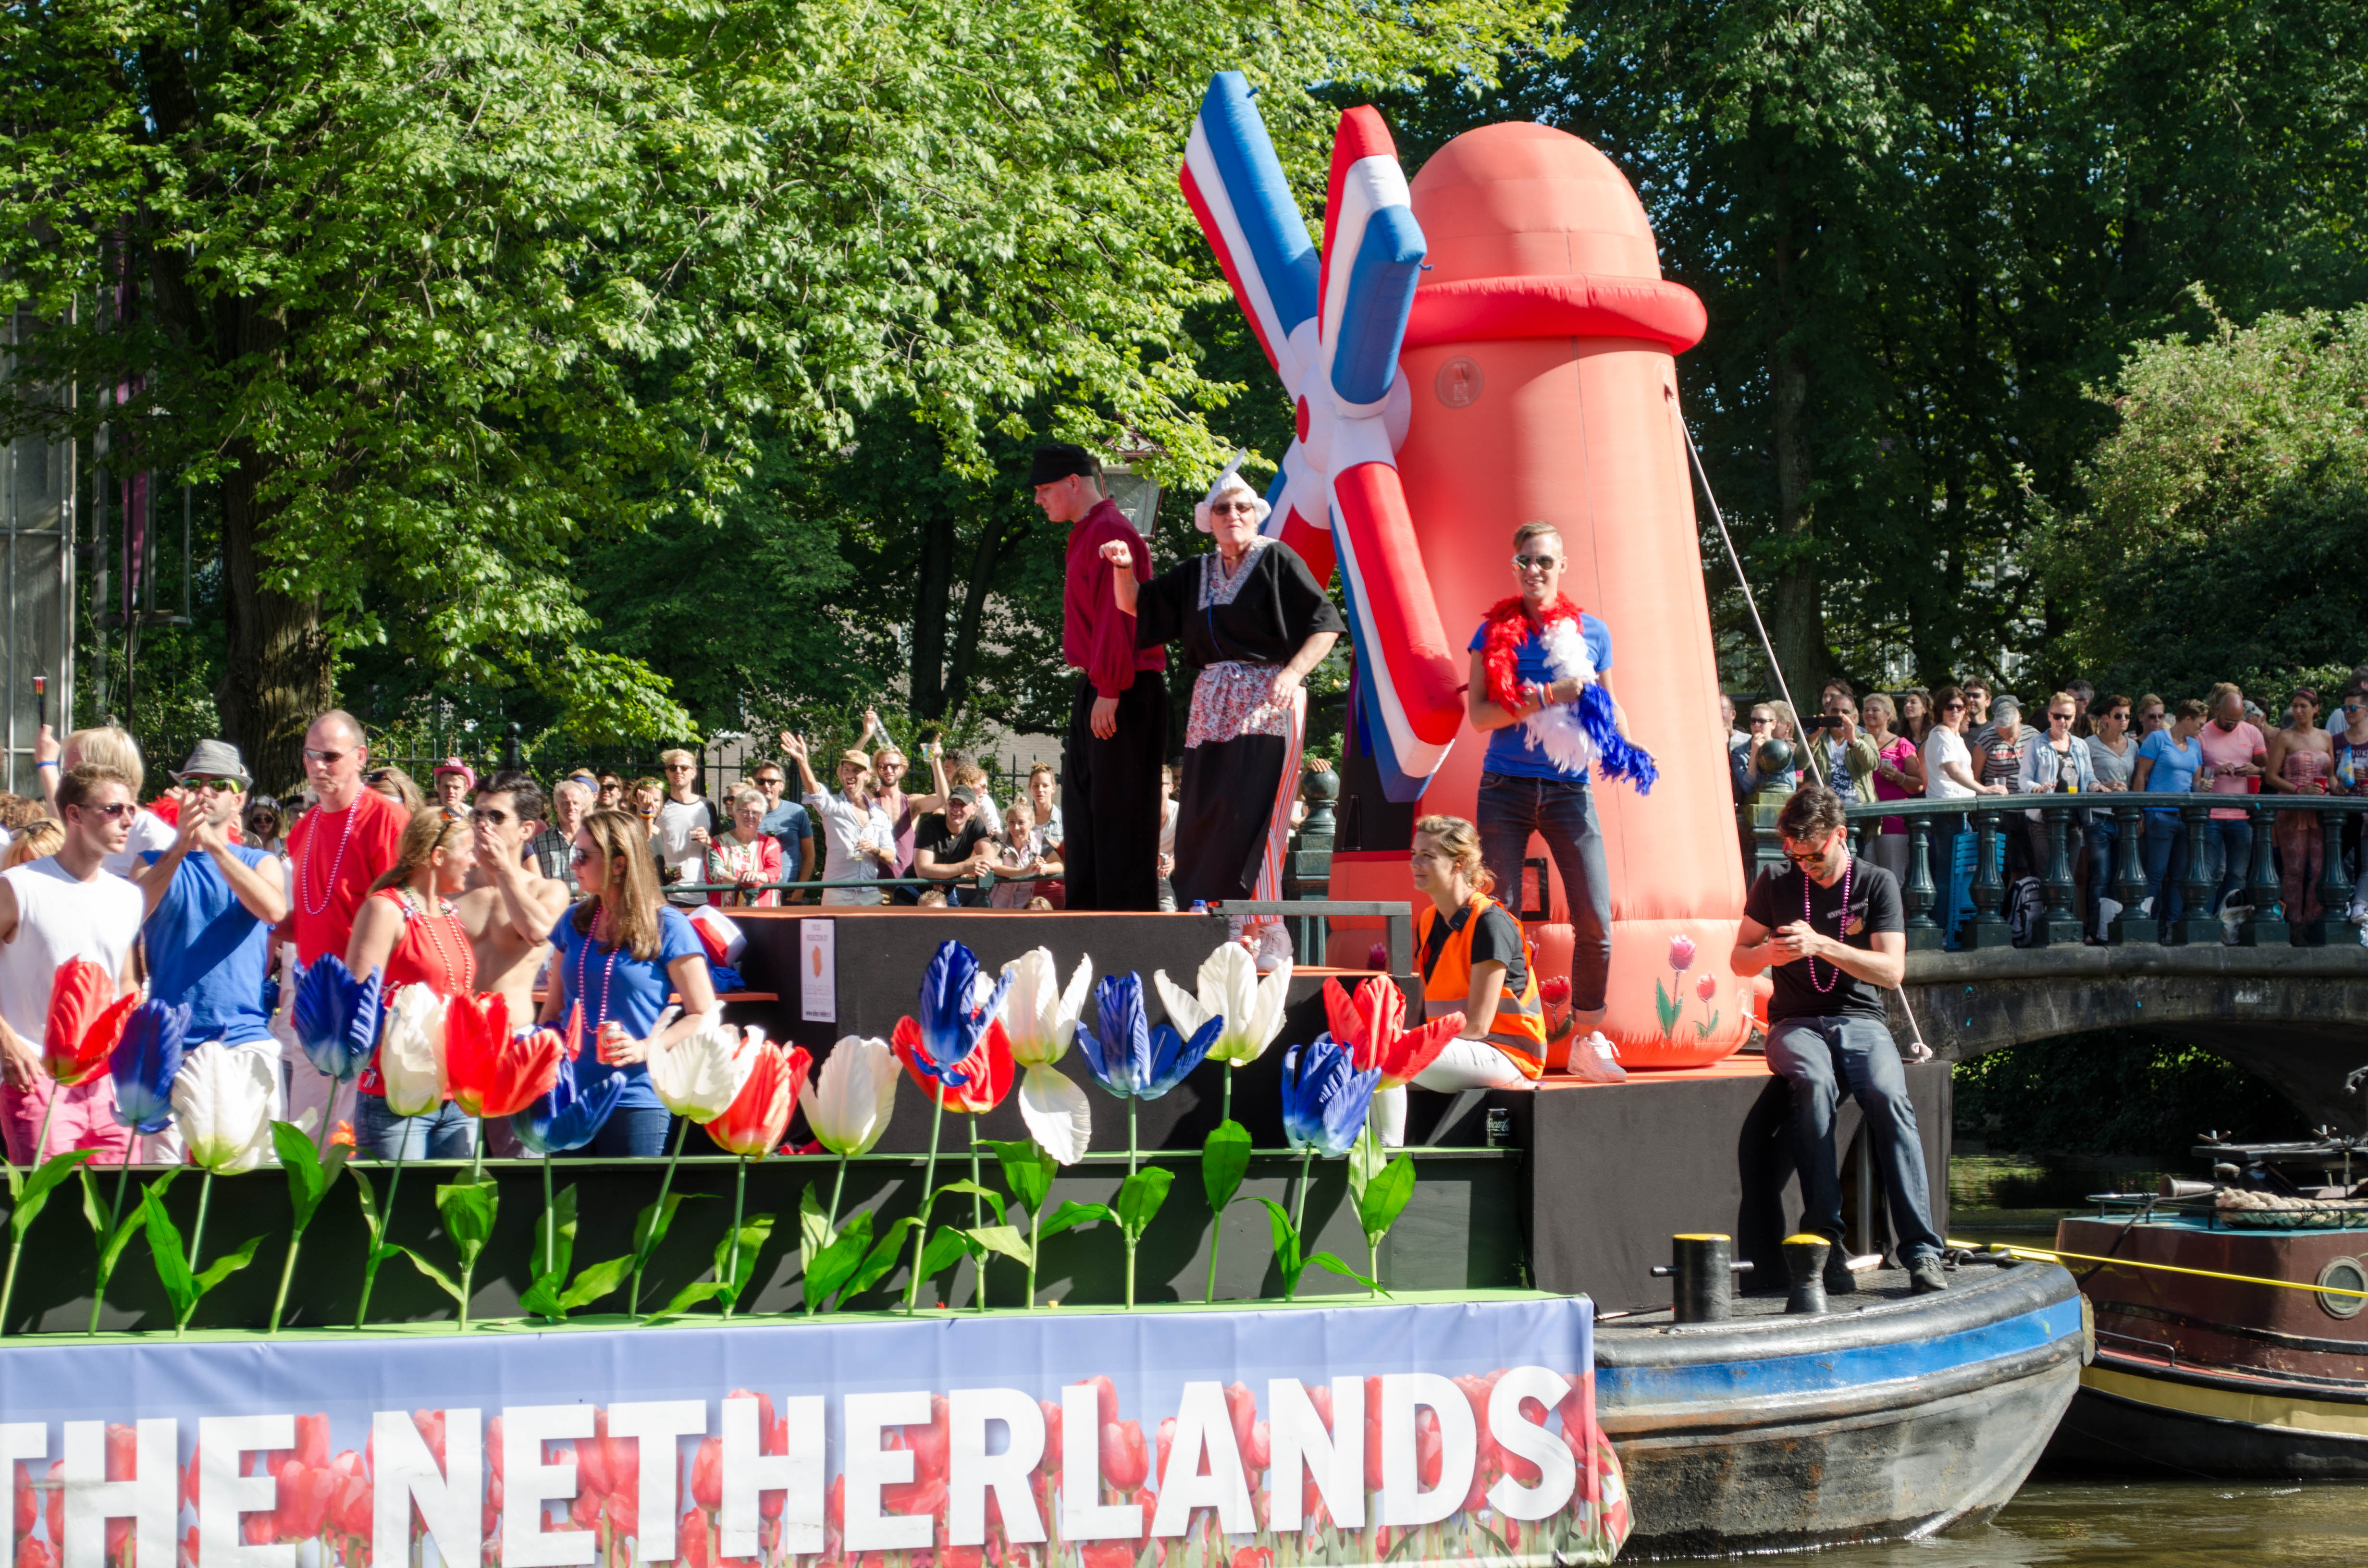 Holland boat during the 2016 Pride Parade in Amsterdam